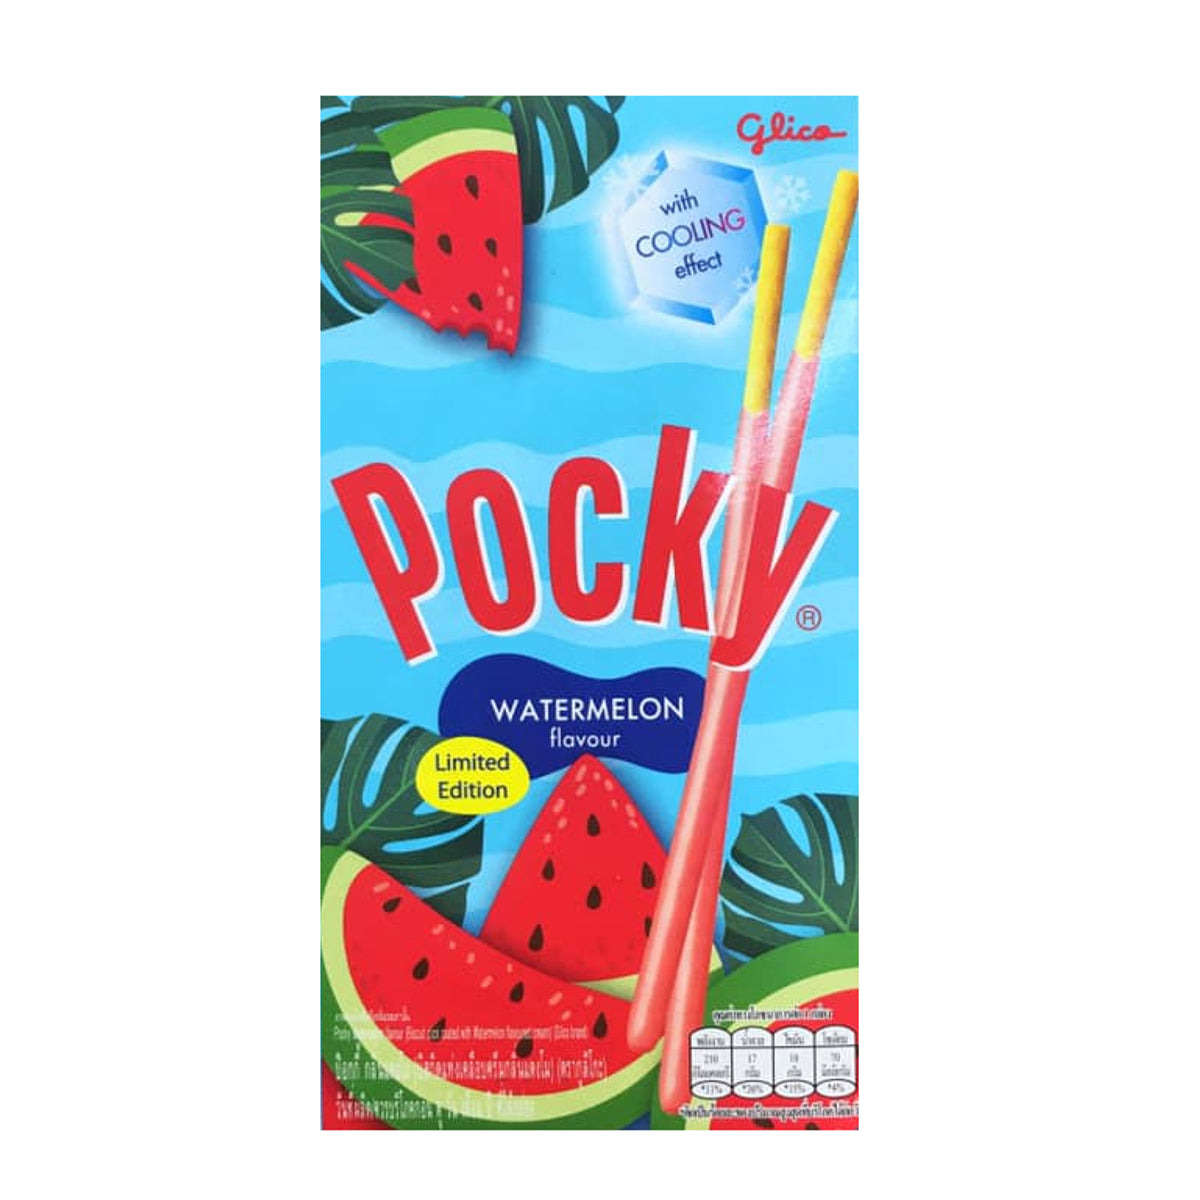 Pocky:Watermelon Limited Edition Flavour 36g